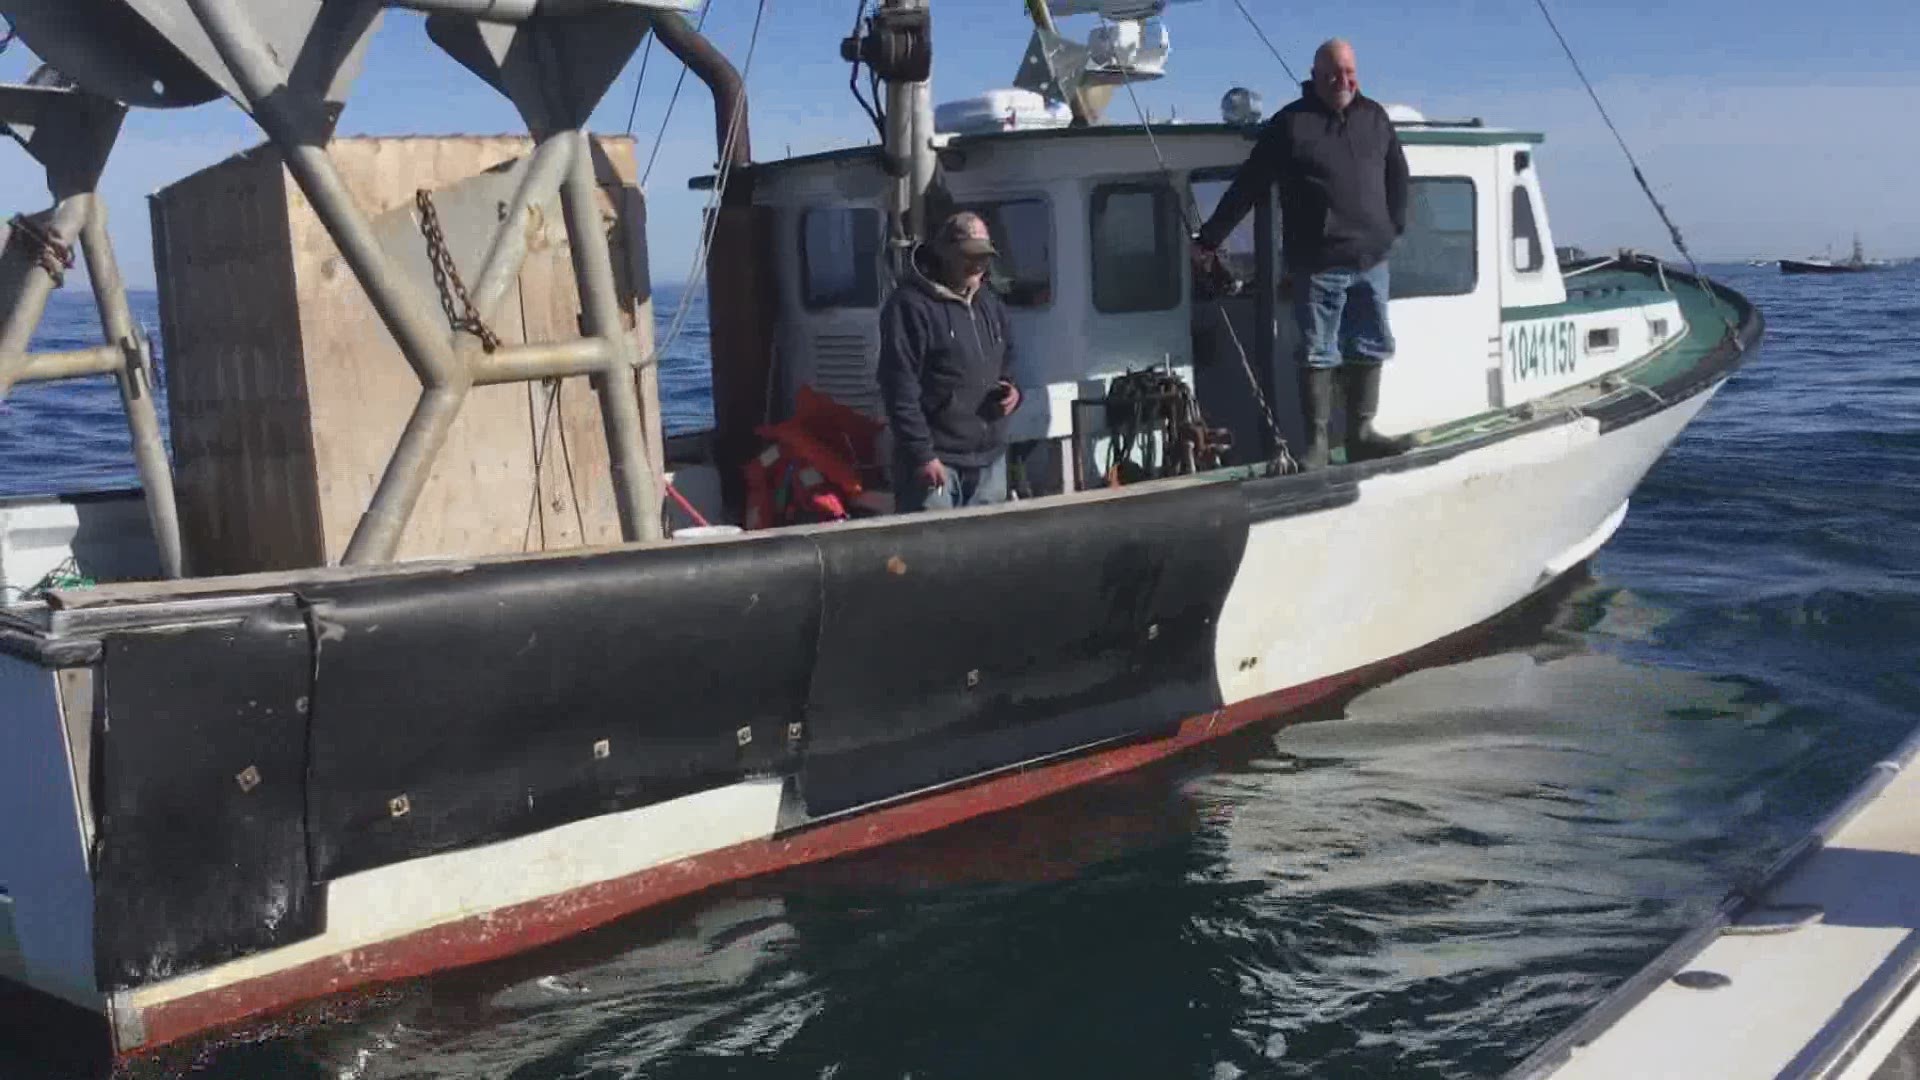 Dozens of Maine lobstermen were out on the water to protest plans to build a floating offshore wind turbine near Monhegan Island.